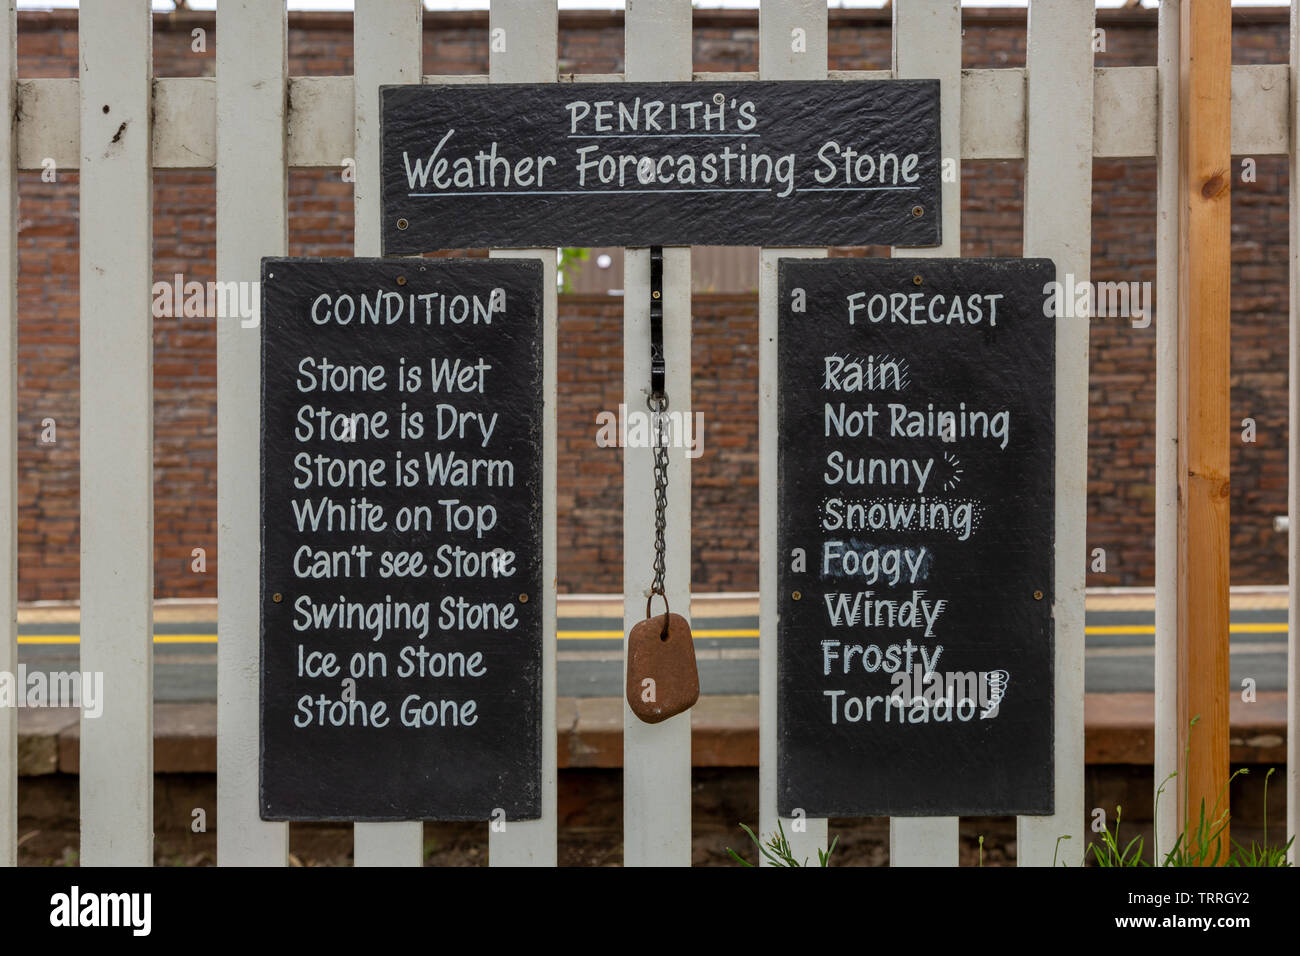 Amusing 'weather forecasting' stone board on a railway station in Penrith, Cumbria, UK Stock Photo